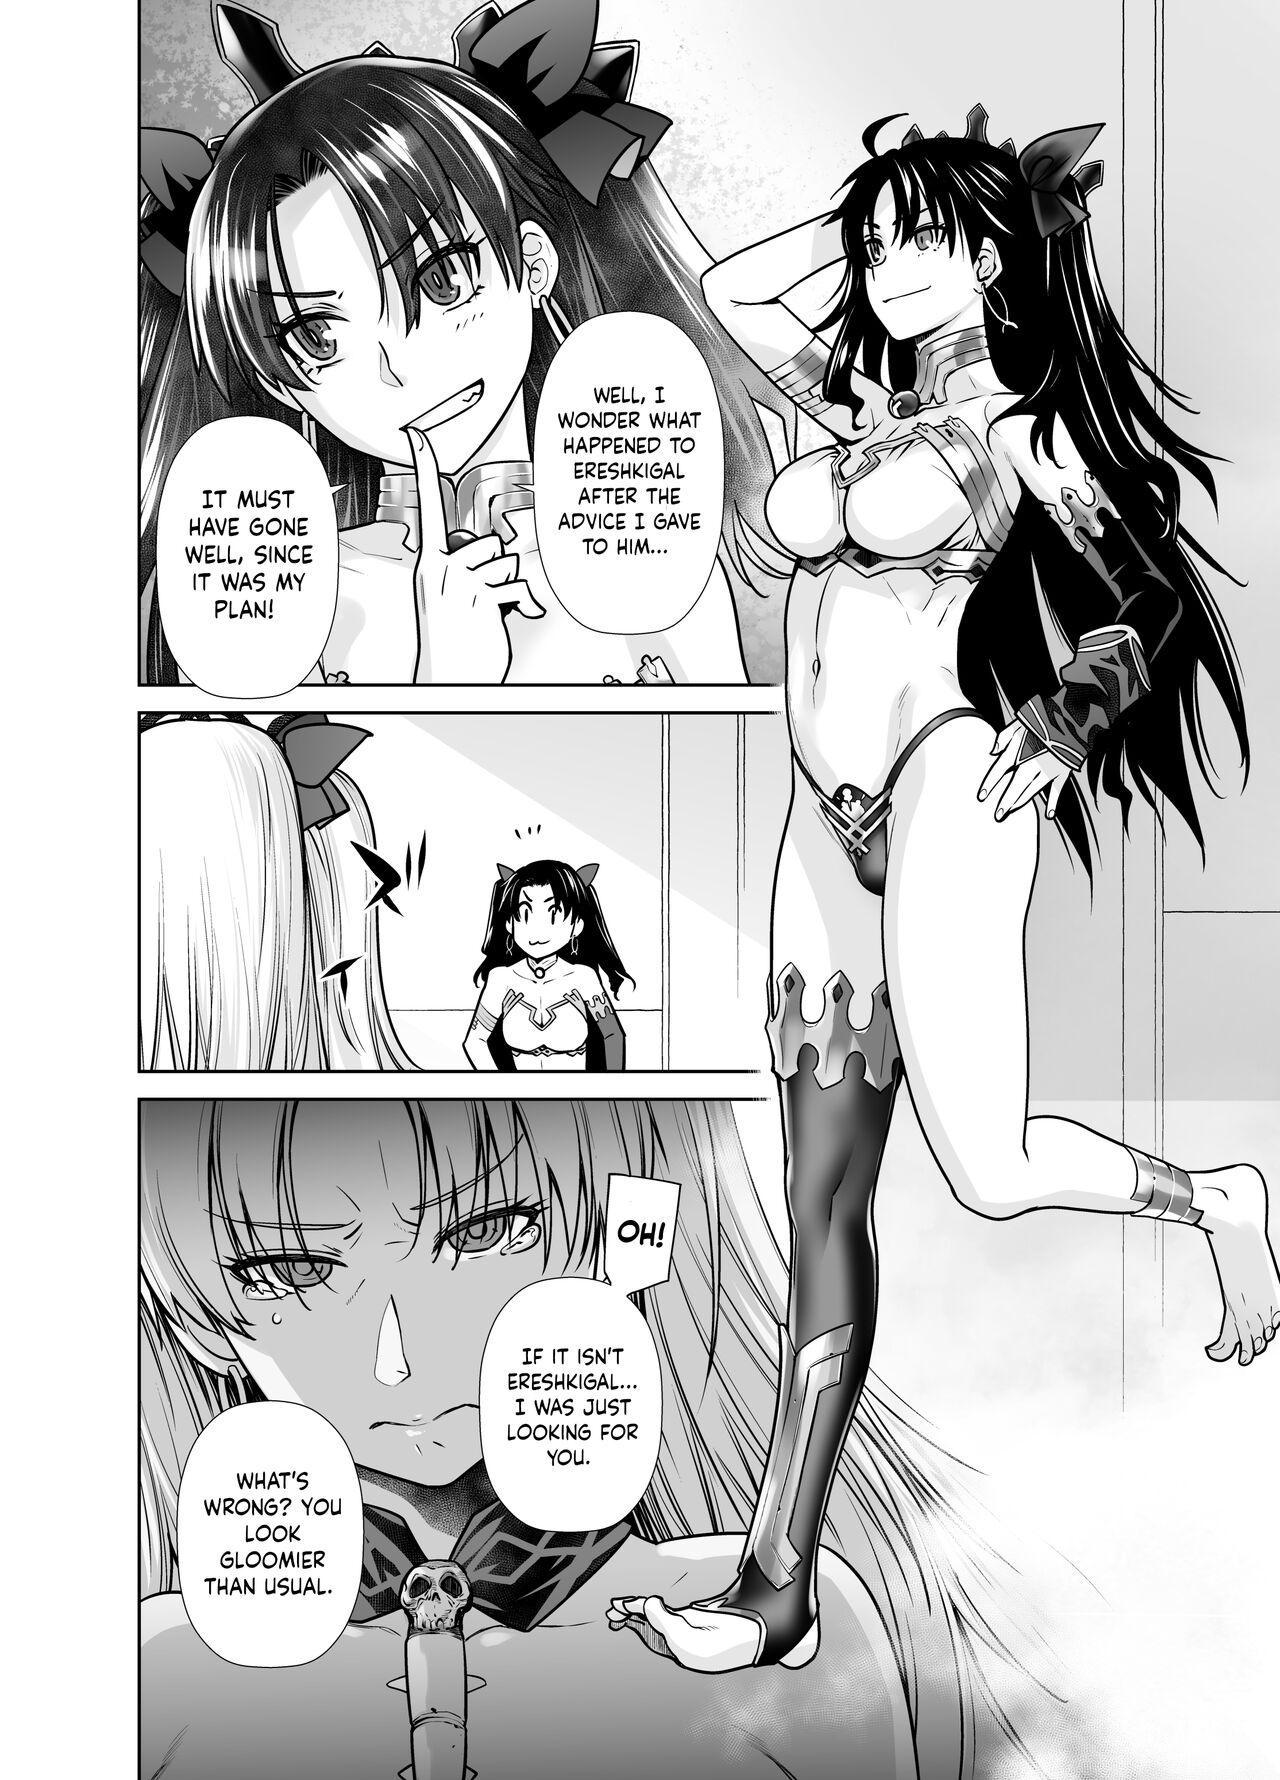 Chicks HEAVEN'S DRIVE 10 - Fate grand order Whores - Page 5